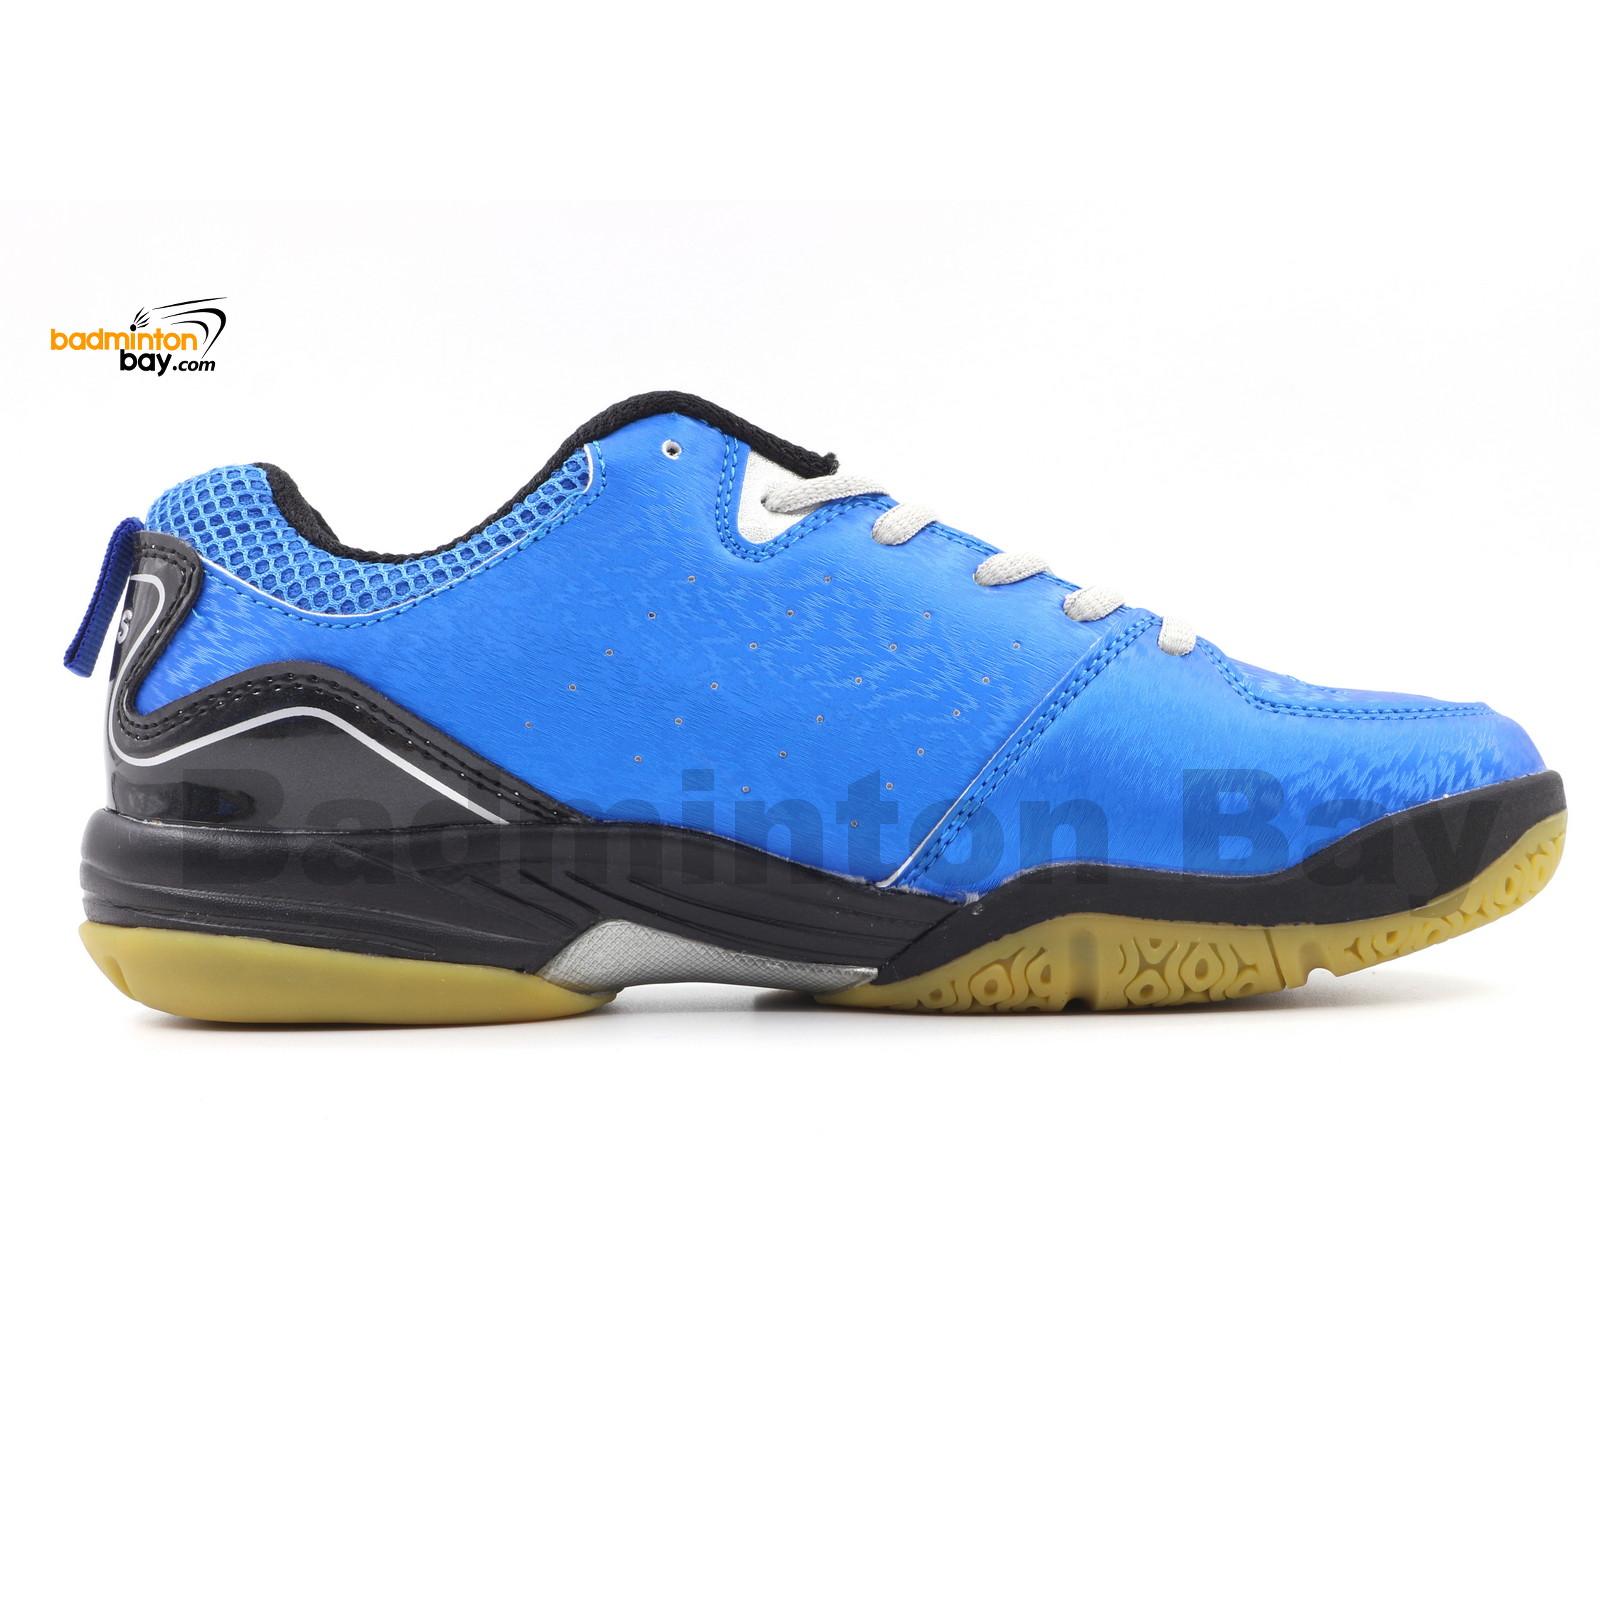 Apacs Cushion Power SP-602 Blue Badminton Shoes With Improved ...